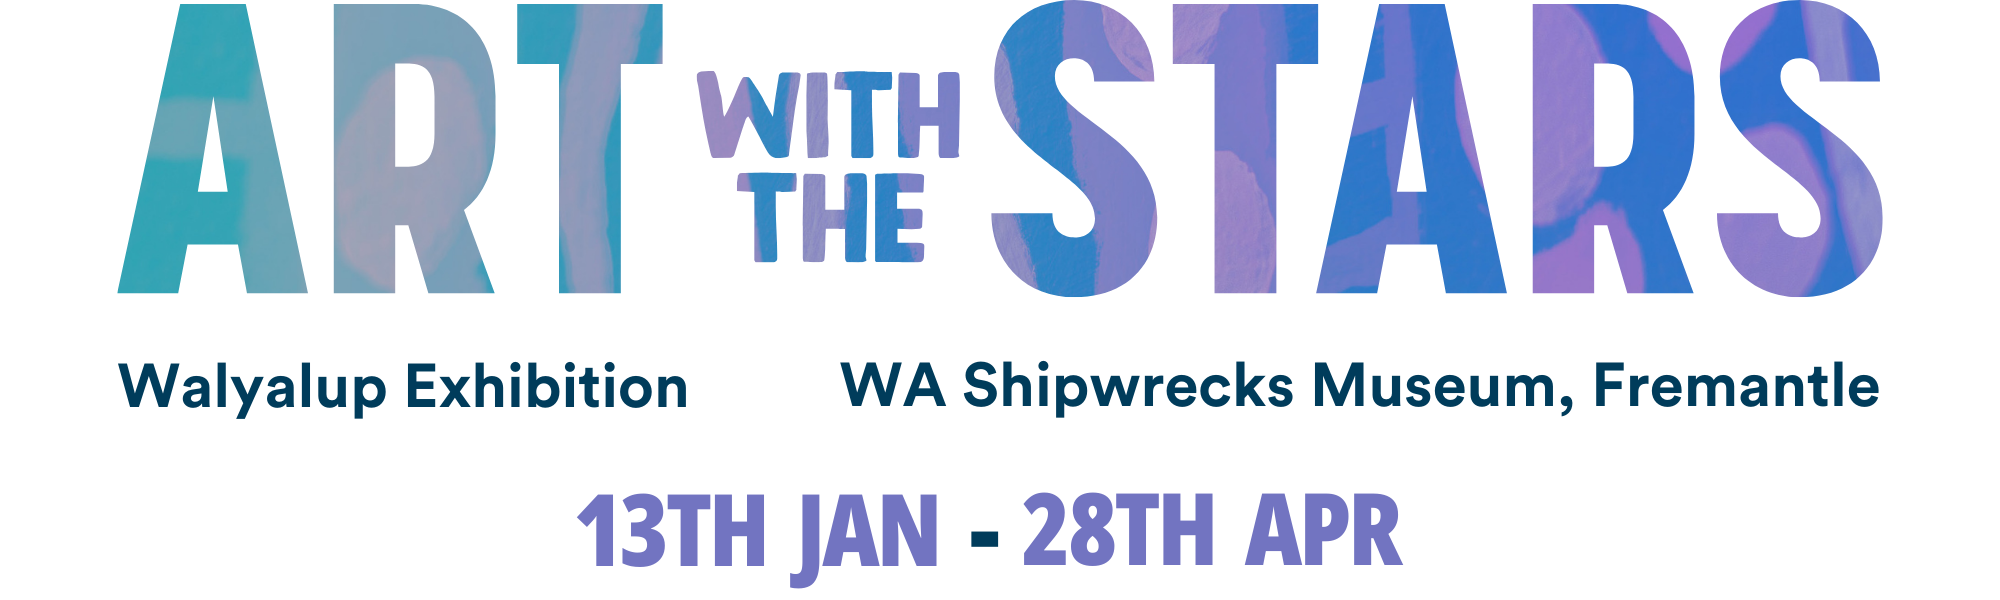 Art with the Stars Walyalup Exhibition | 13 Jan - 28 April